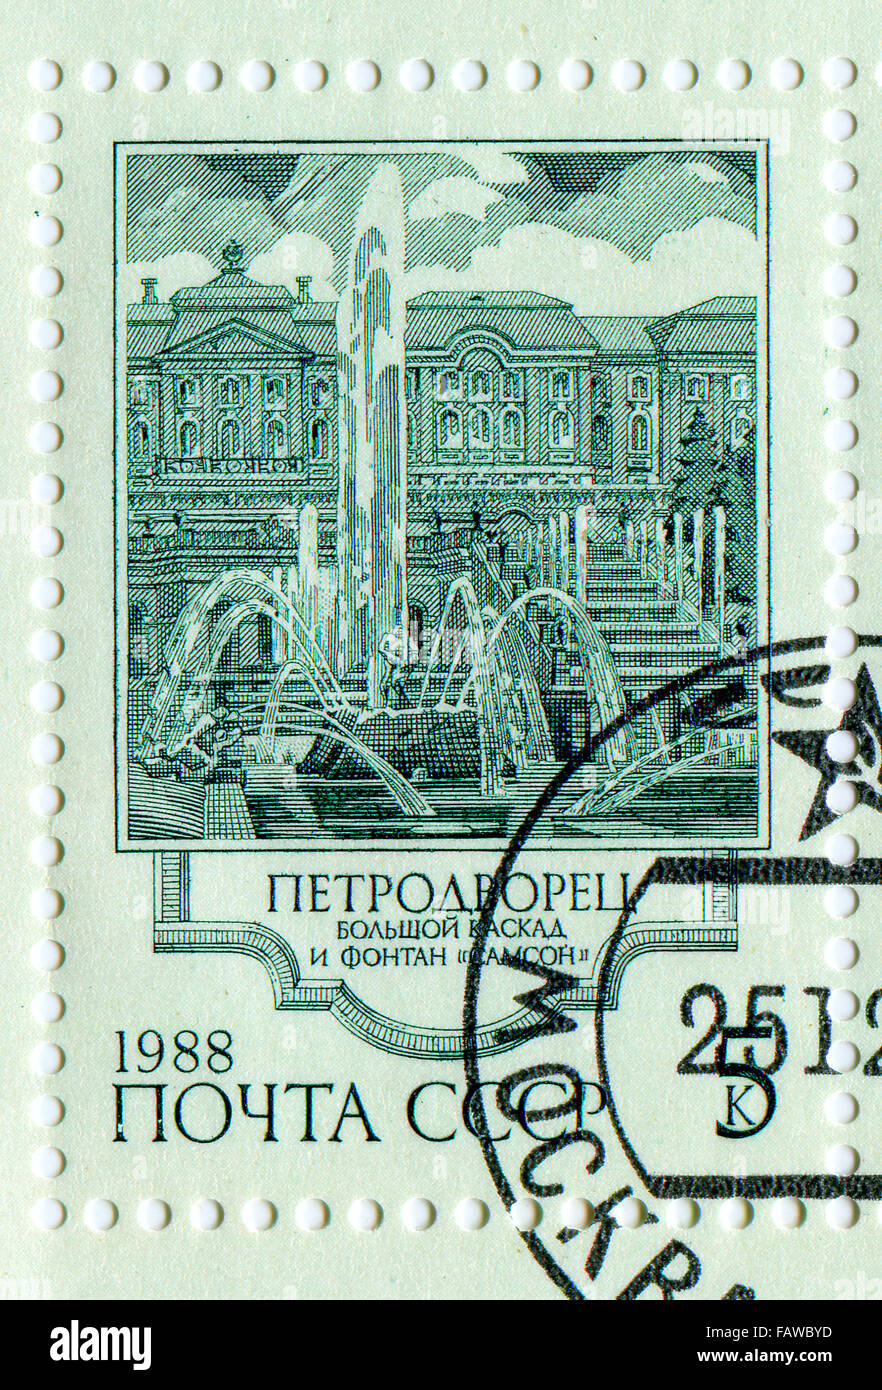 USSR - CIRCA 1988: A stamp printed in USSR shows image of the Fountains of Peterhof Big Cascad and Samson, circa 1988. Stock Photo